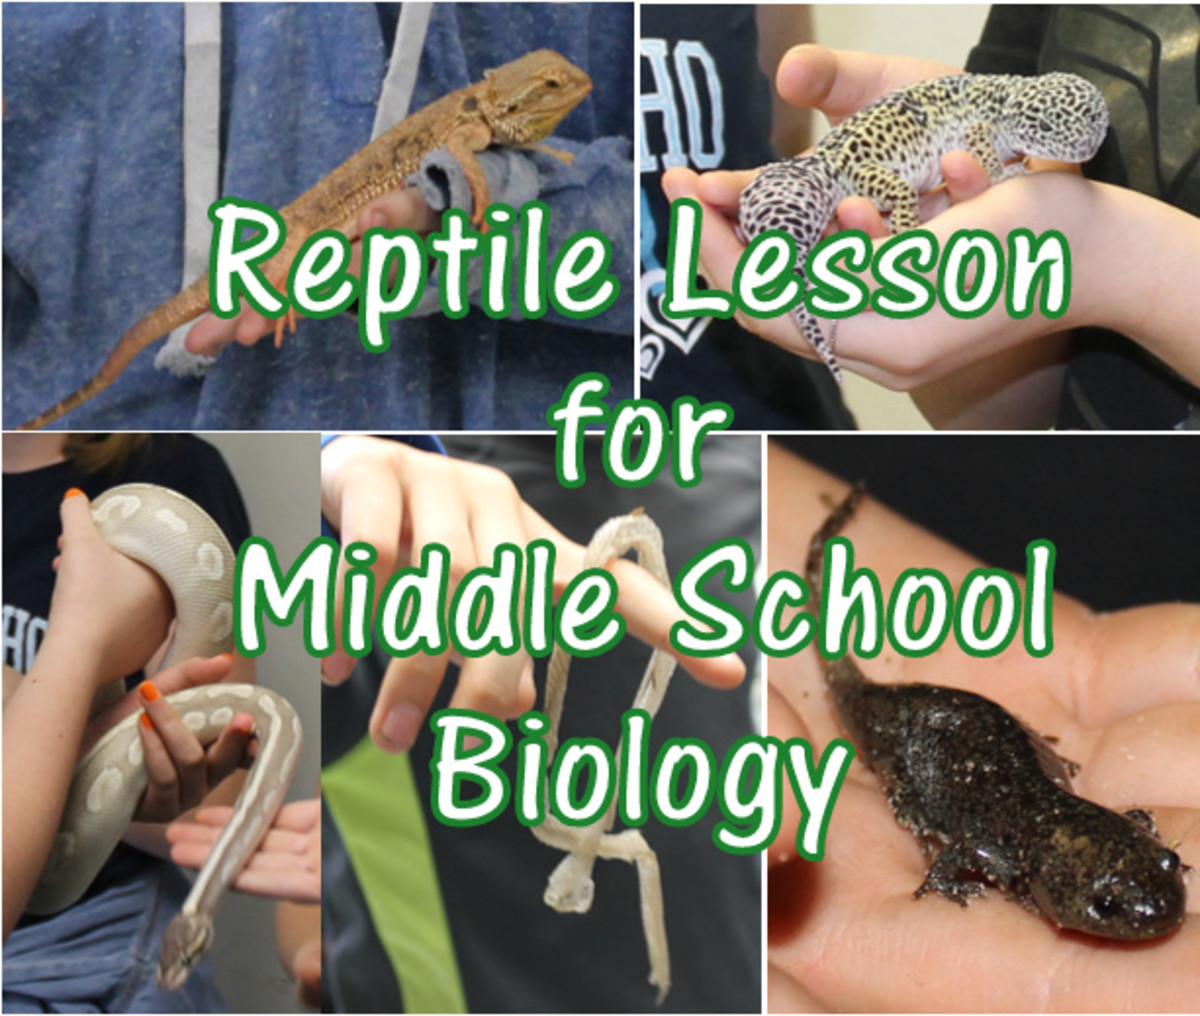 Reptile Lesson for Middle School Biology